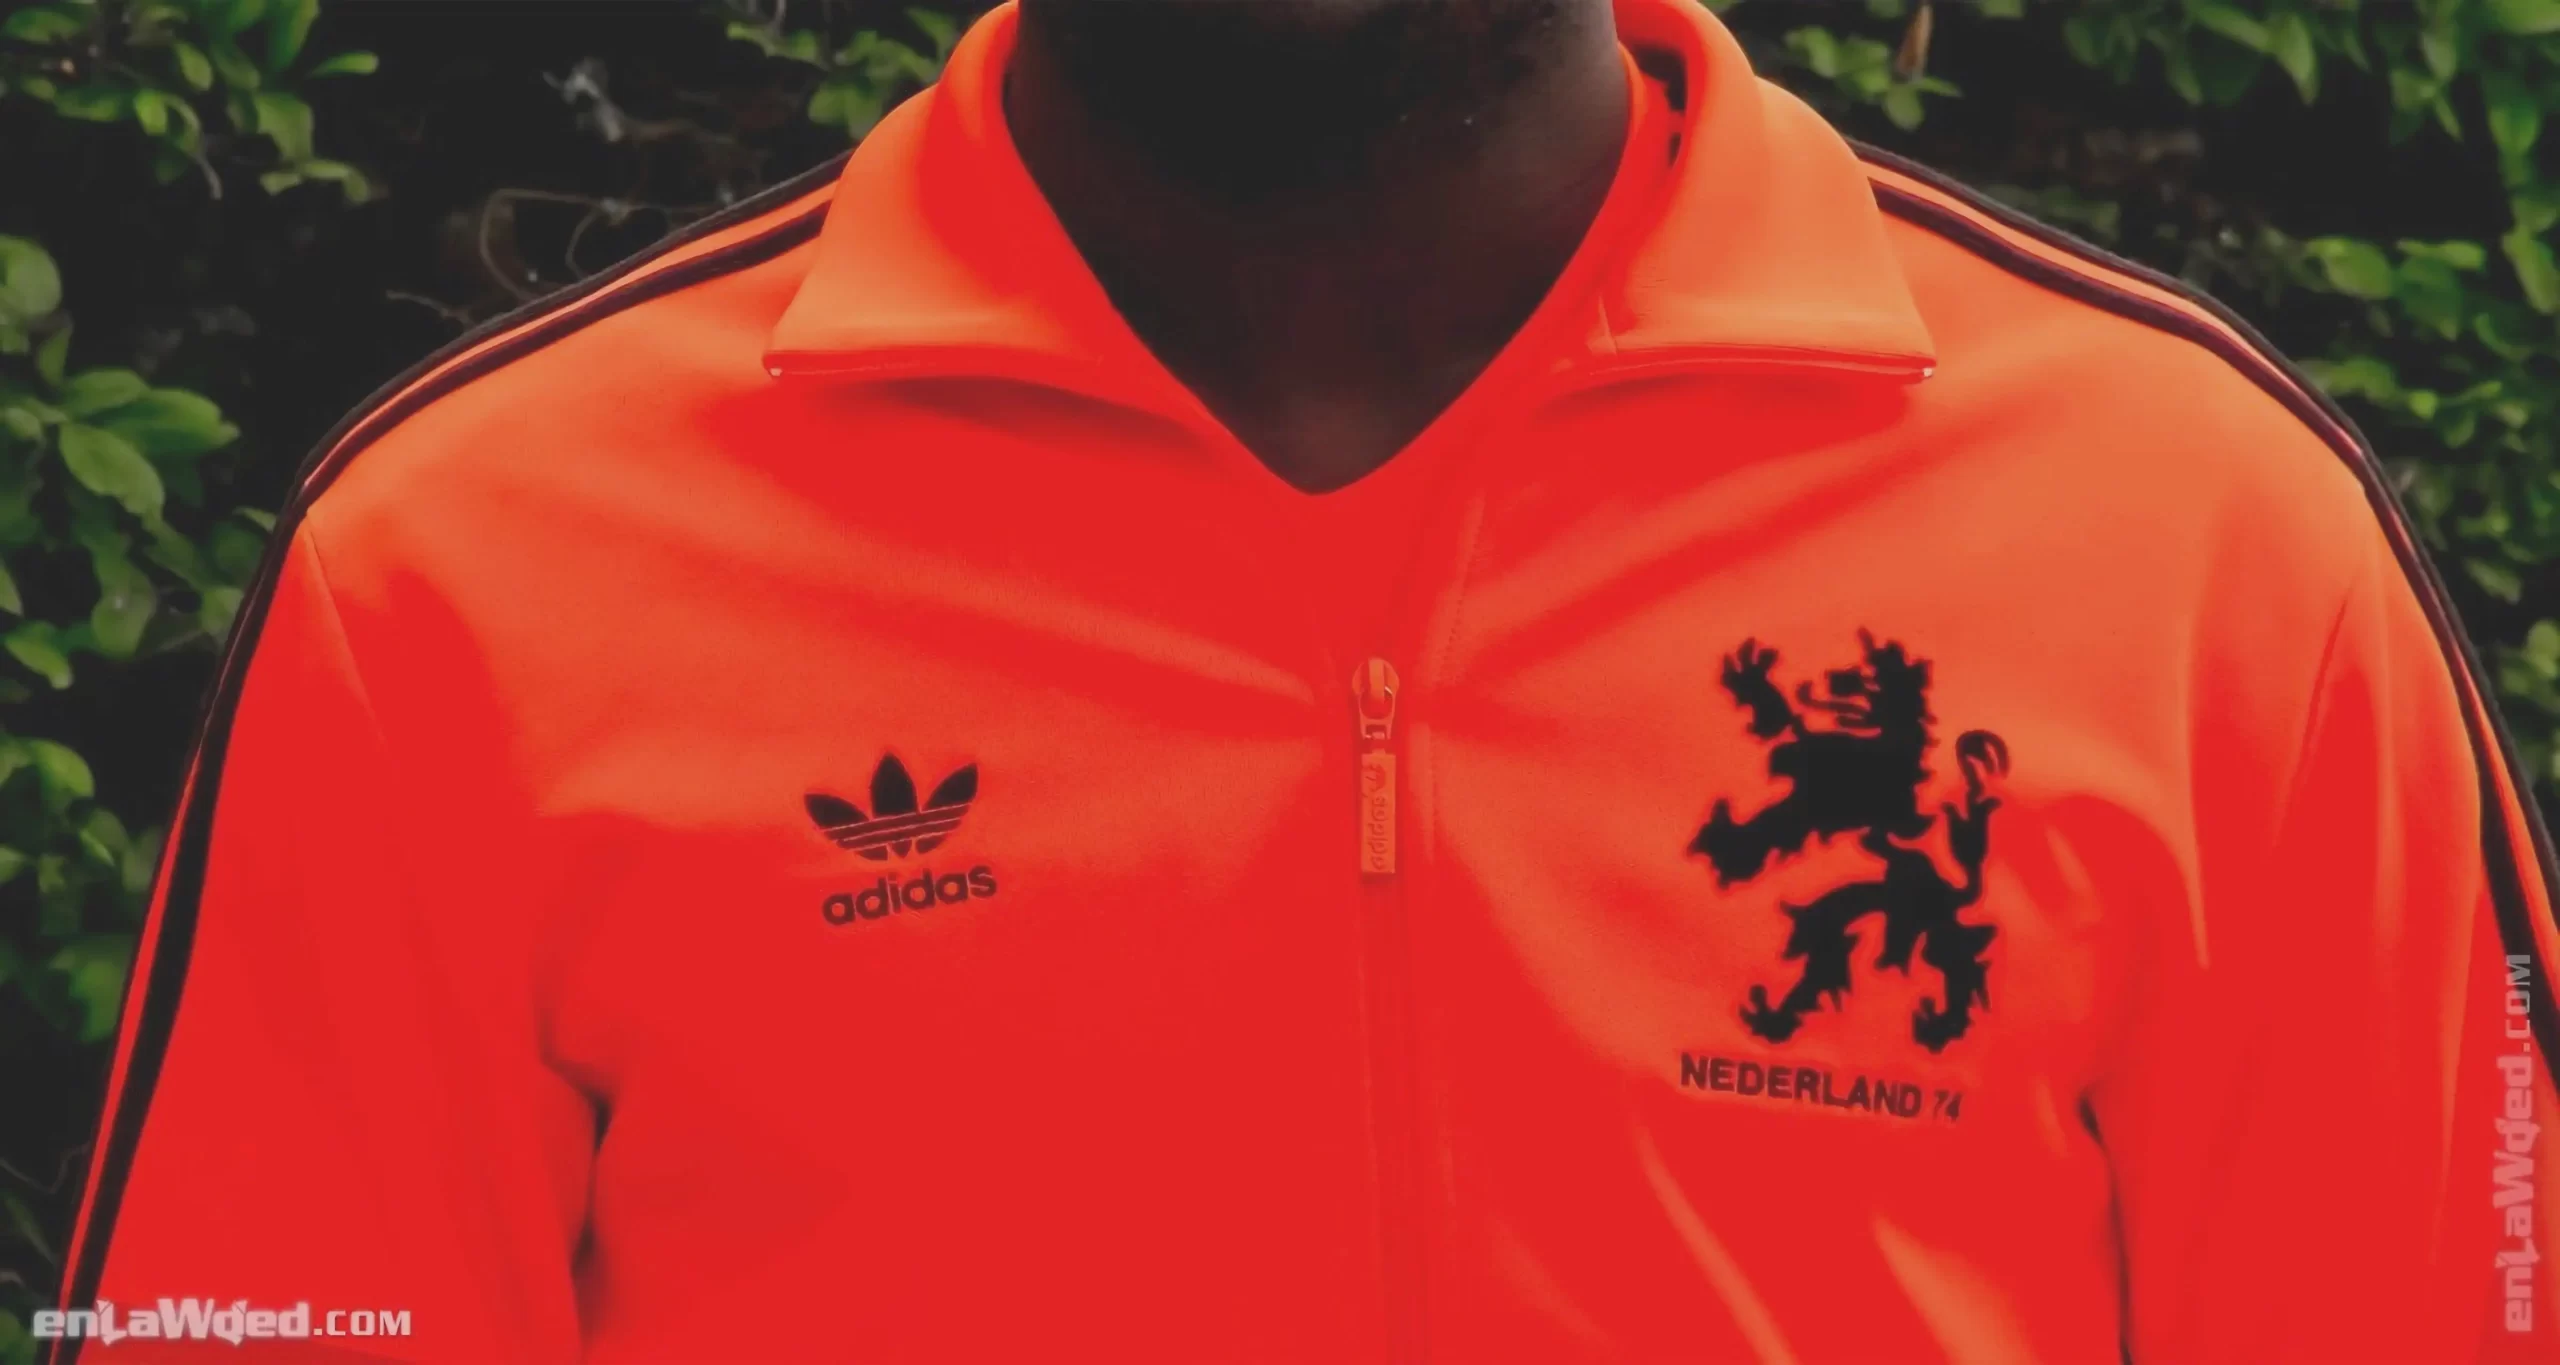 Men’s 2005 Netherlands ’74 Total Football TT by Adidas: Conscientious (EnLawded.com file #lmc47ksbc59oe5pnbbd)